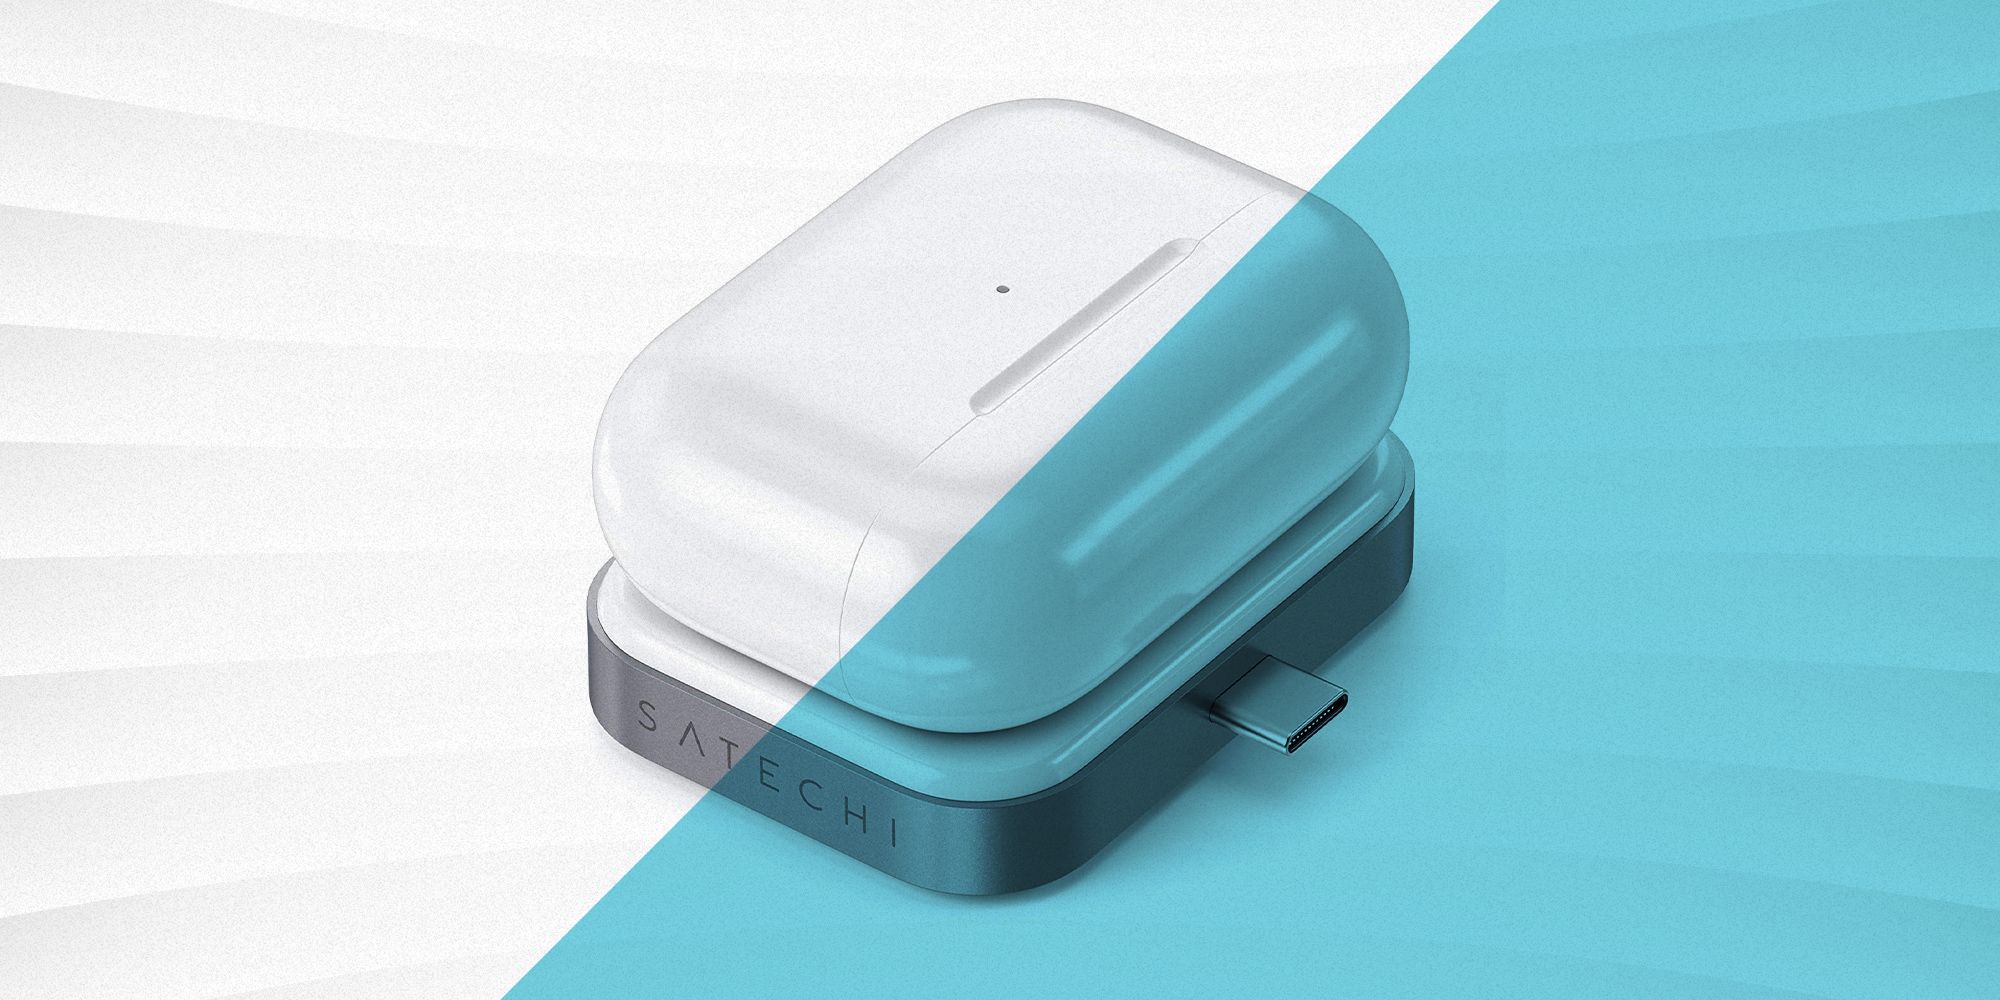 The 11 Airpods Accessories in 2023 - for Apple Airpods